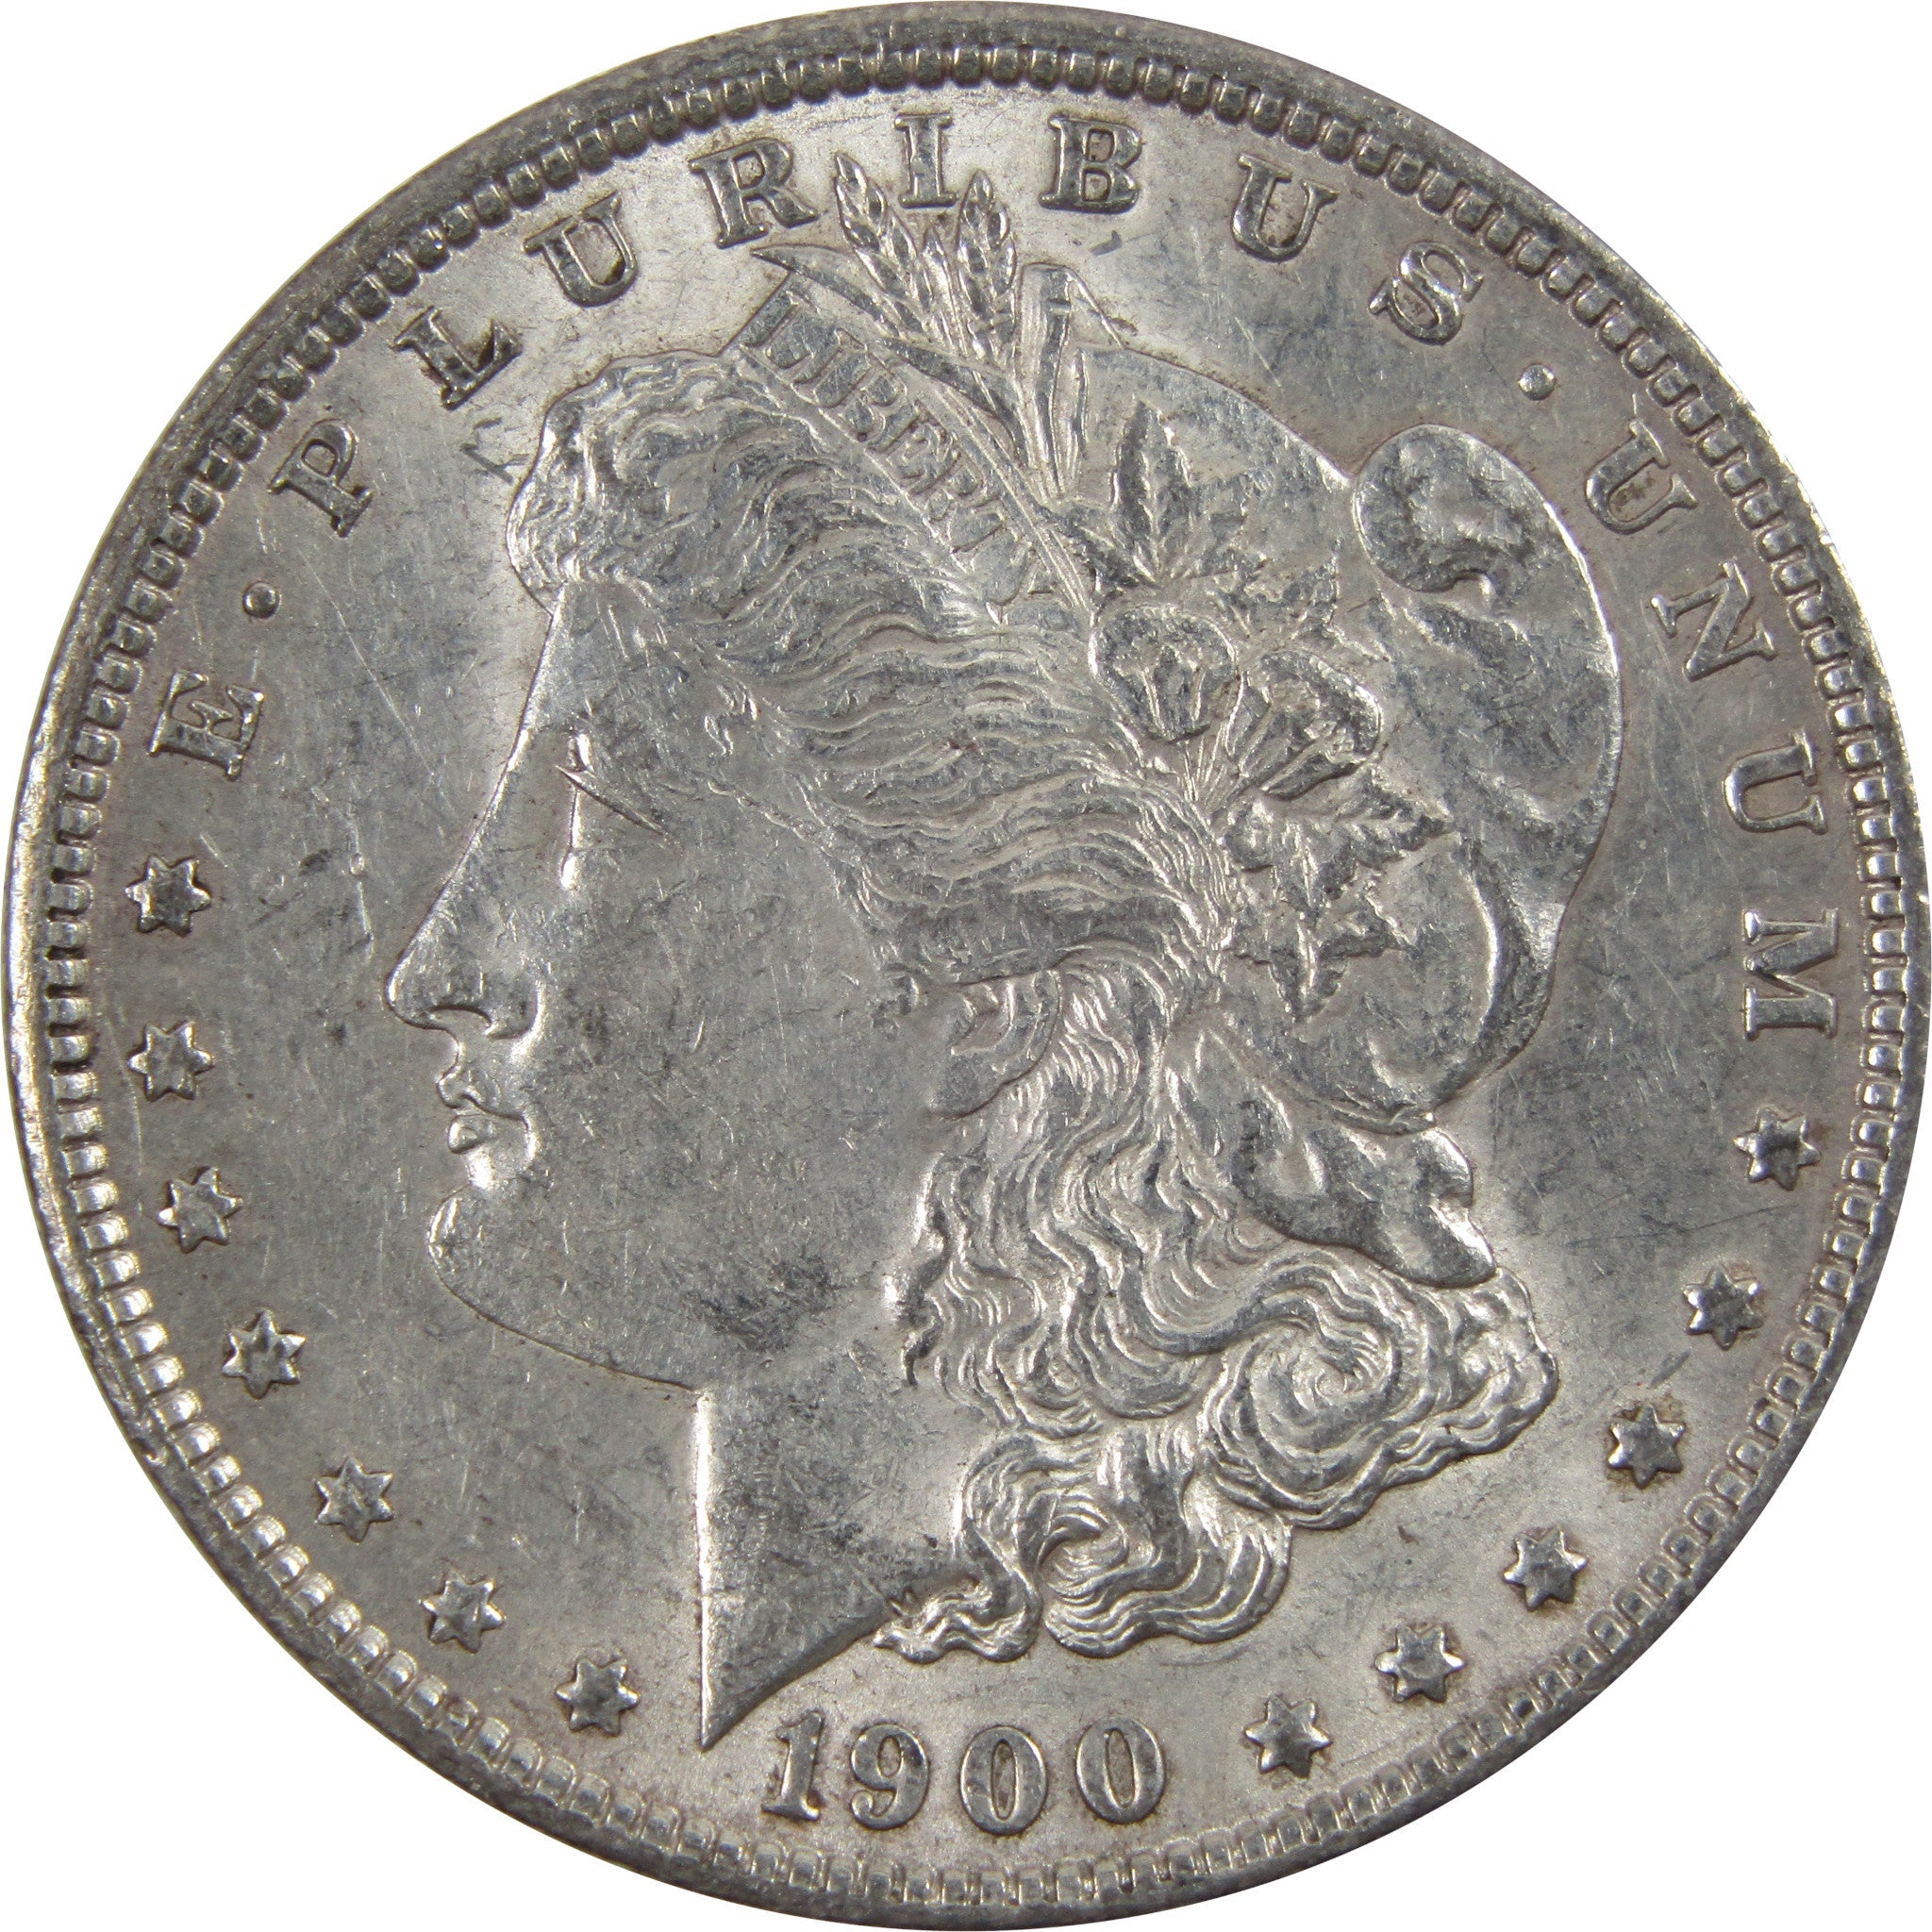 1900 Morgan Dollar AU About Uncirculated 90% Silver $1 Coin SKU:I5525 - Morgan coin - Morgan silver dollar - Morgan silver dollar for sale - Profile Coins &amp; Collectibles